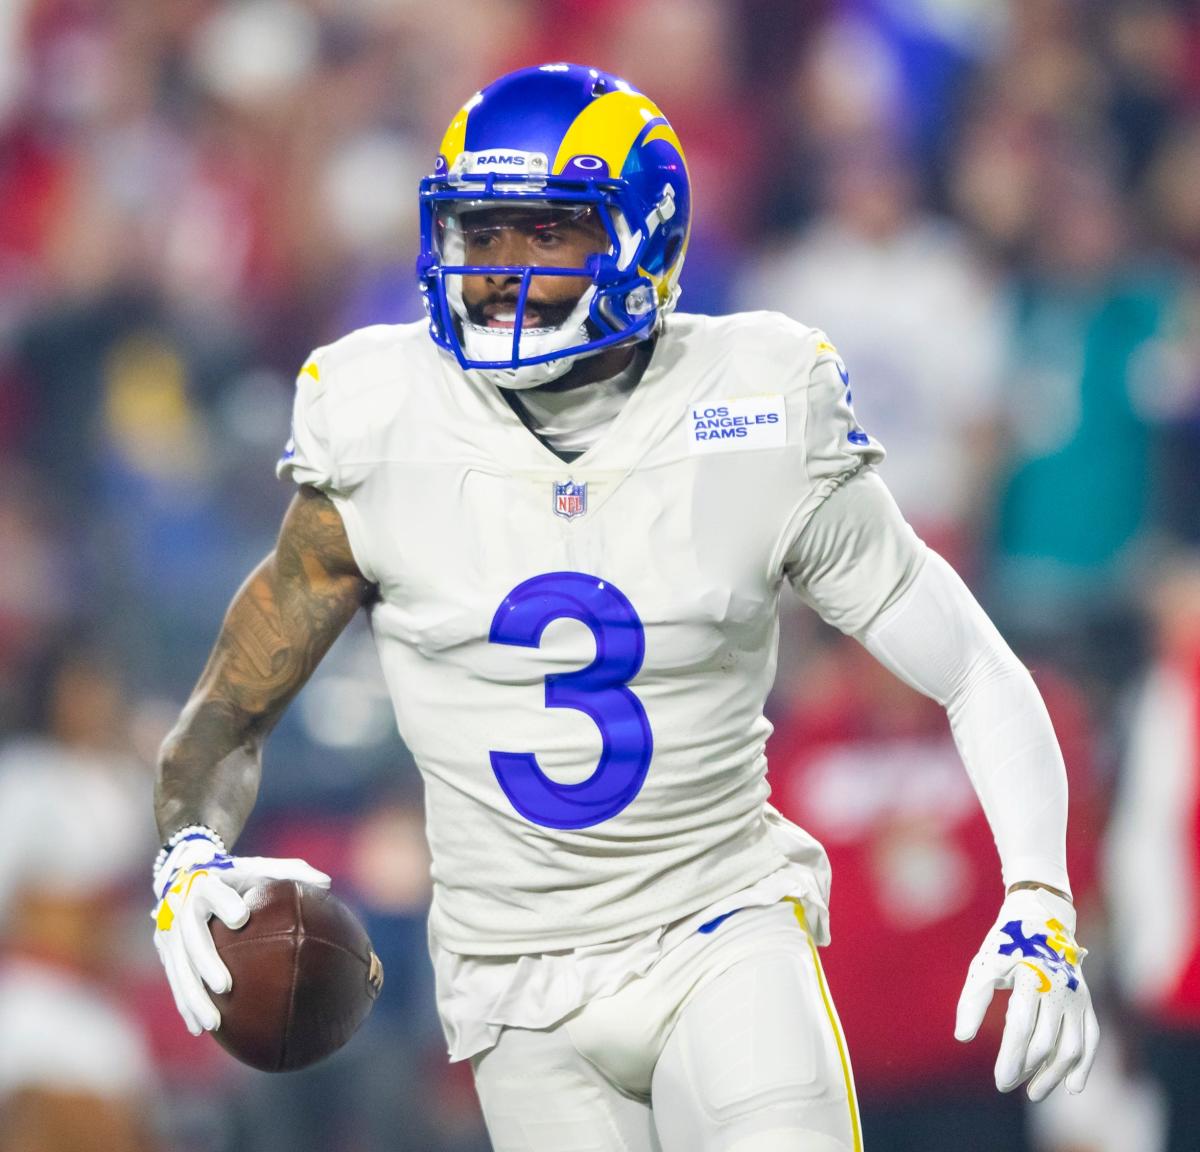 3 players the NY Giants should sign not named Odell Beckham Jr.